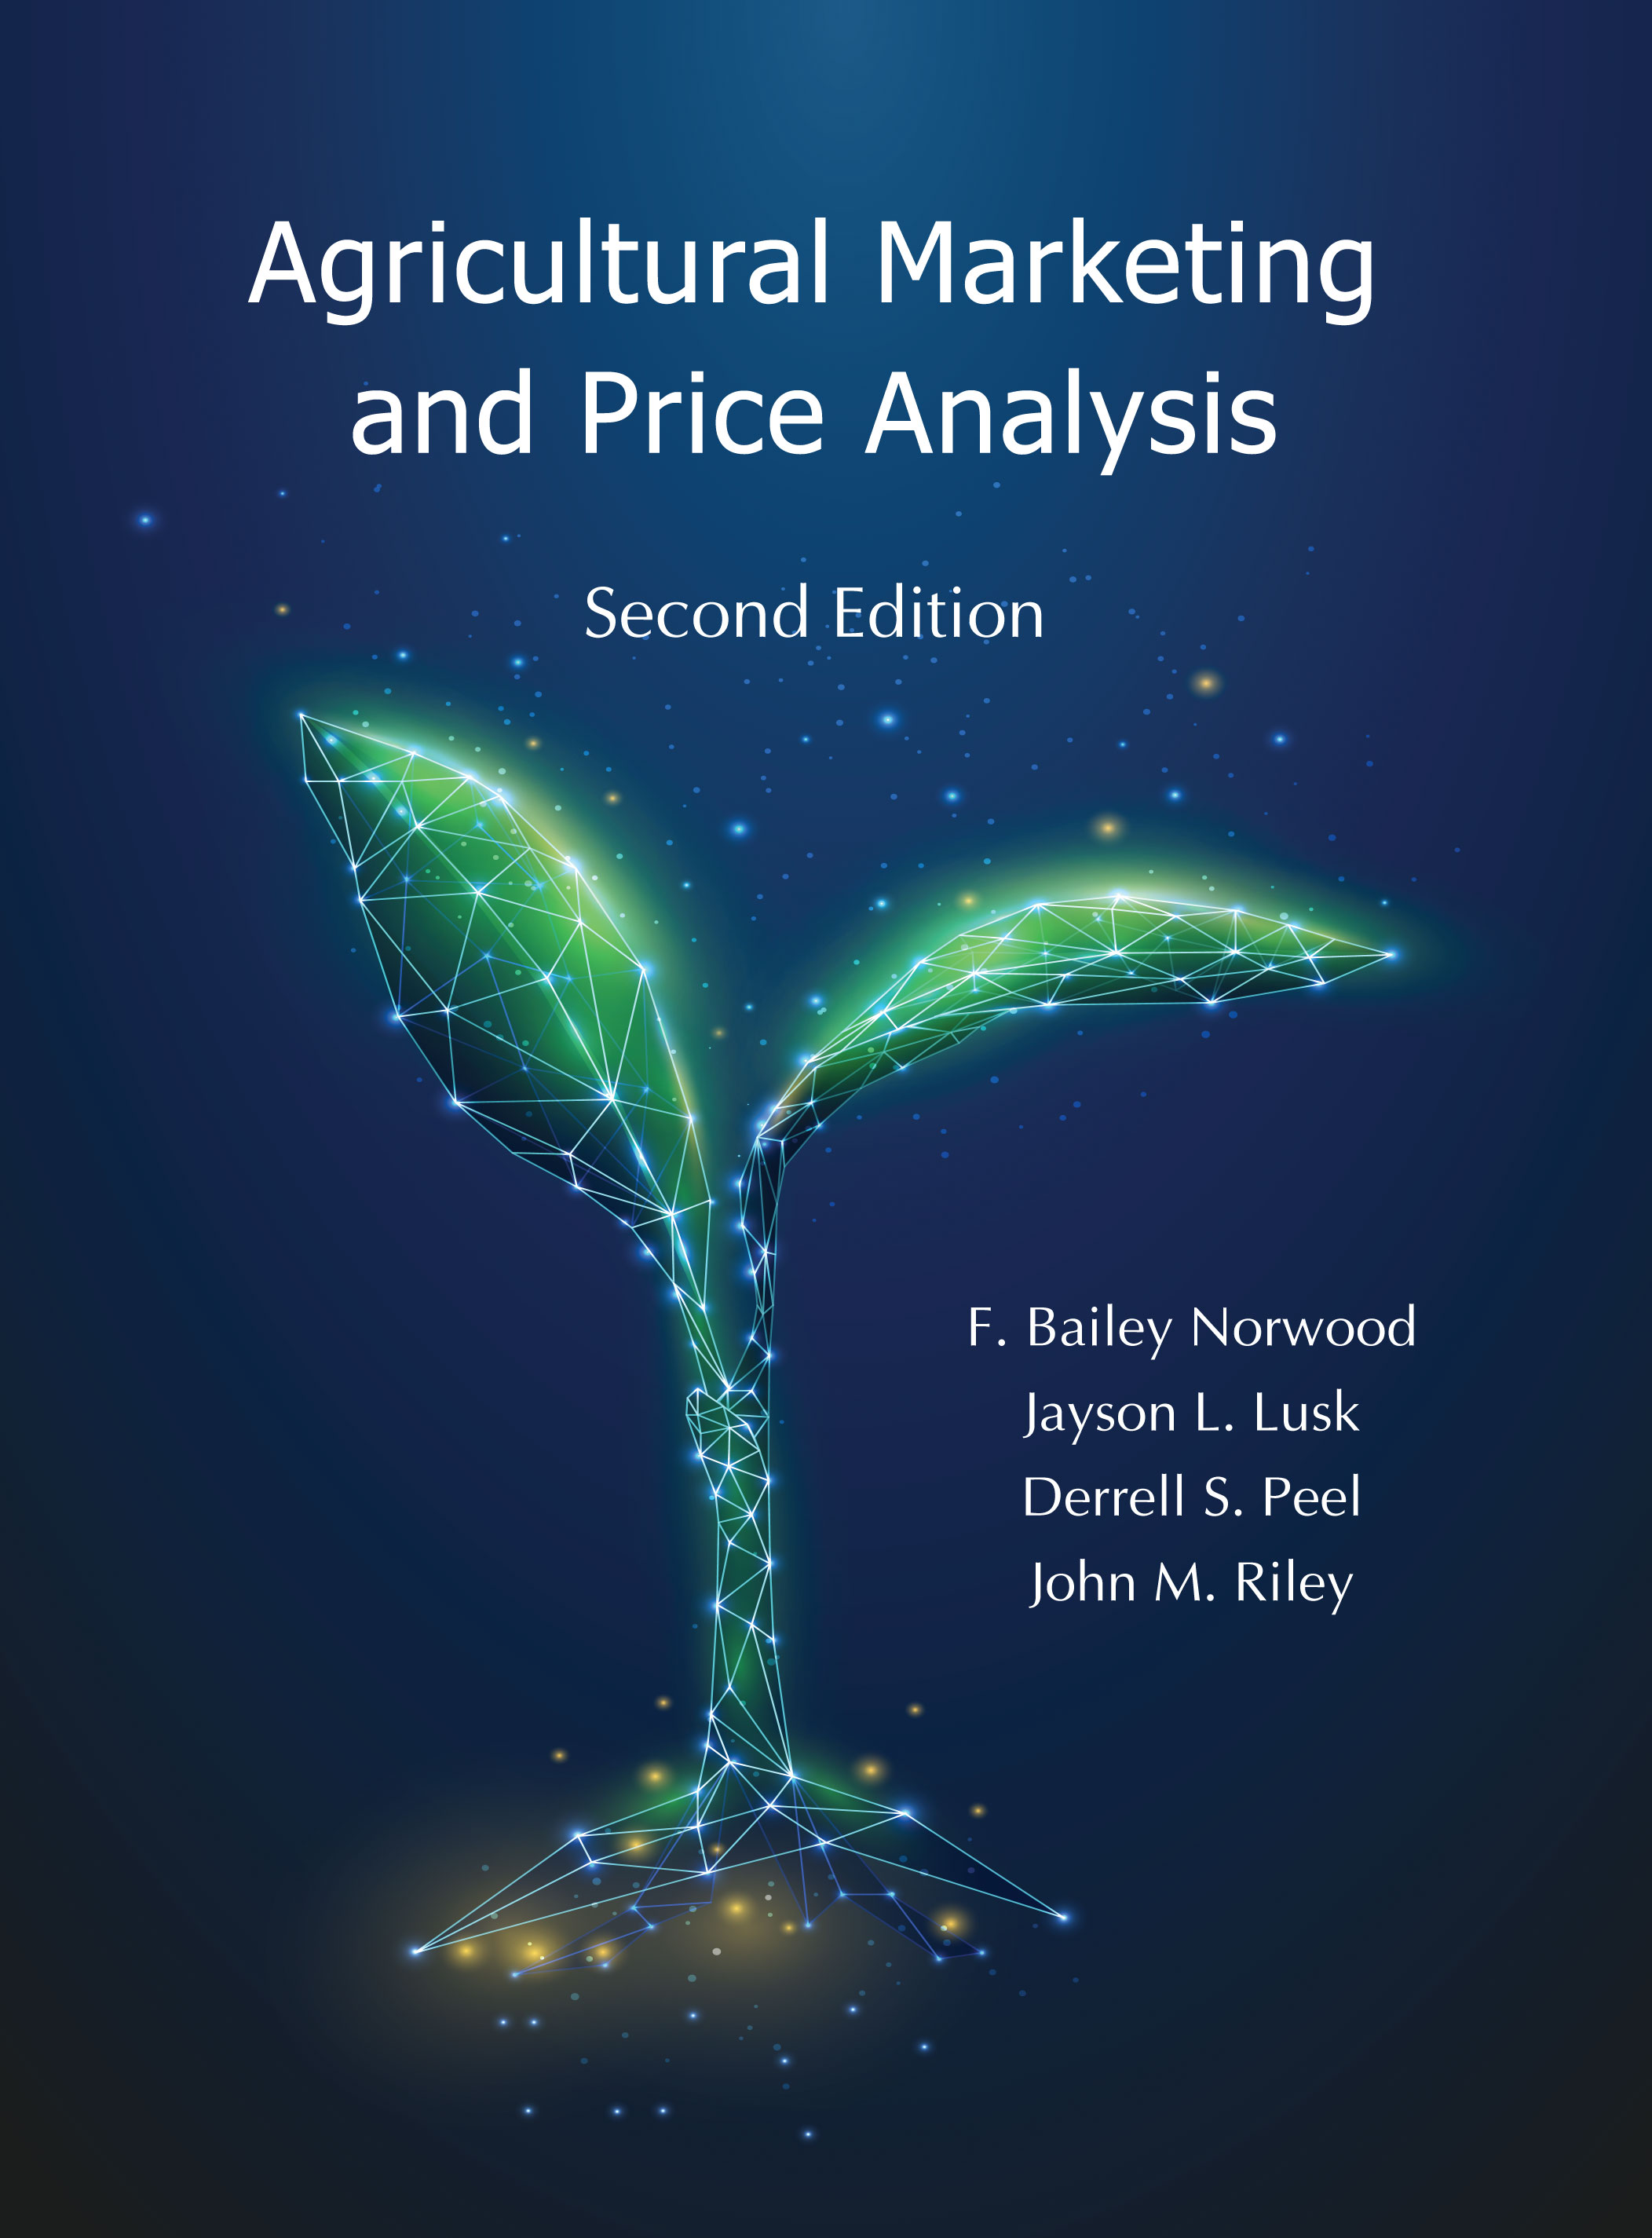 Agricultural Marketing and Price Analysis:  by F. Bailey Norwood, Jayson L. Lusk, Derrell S. Peel, John M. Riley